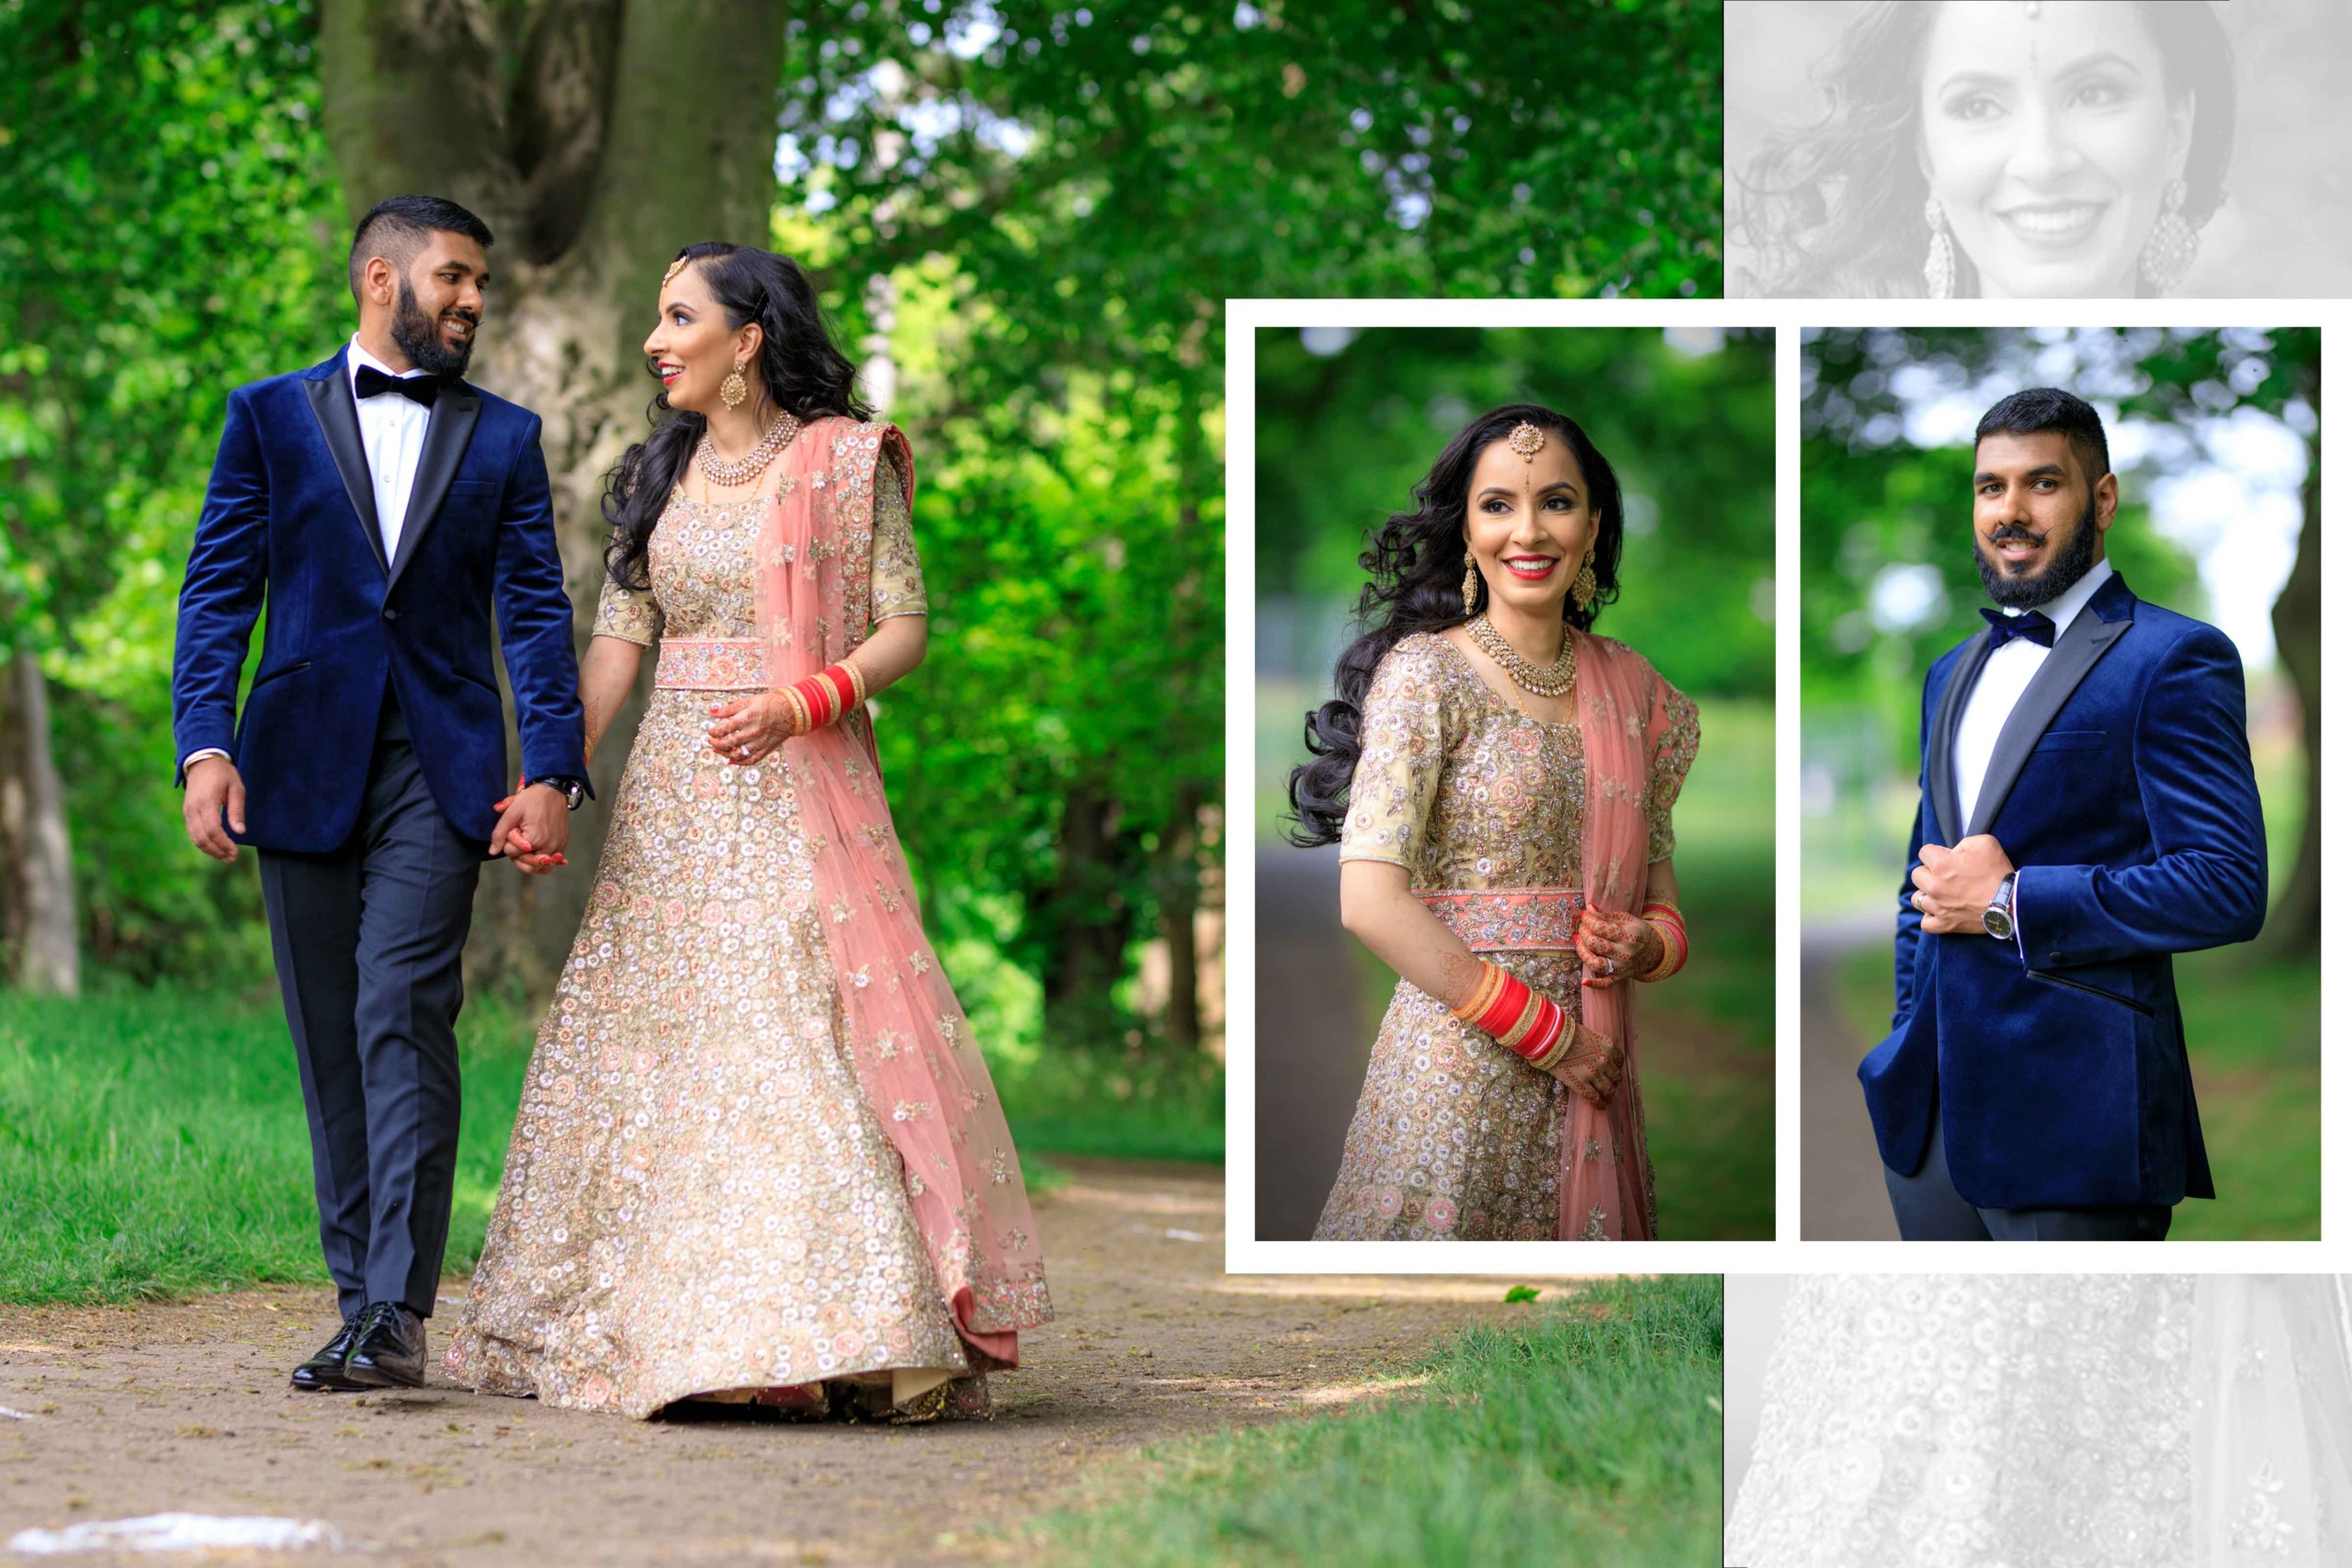 Asian wedding photography stories